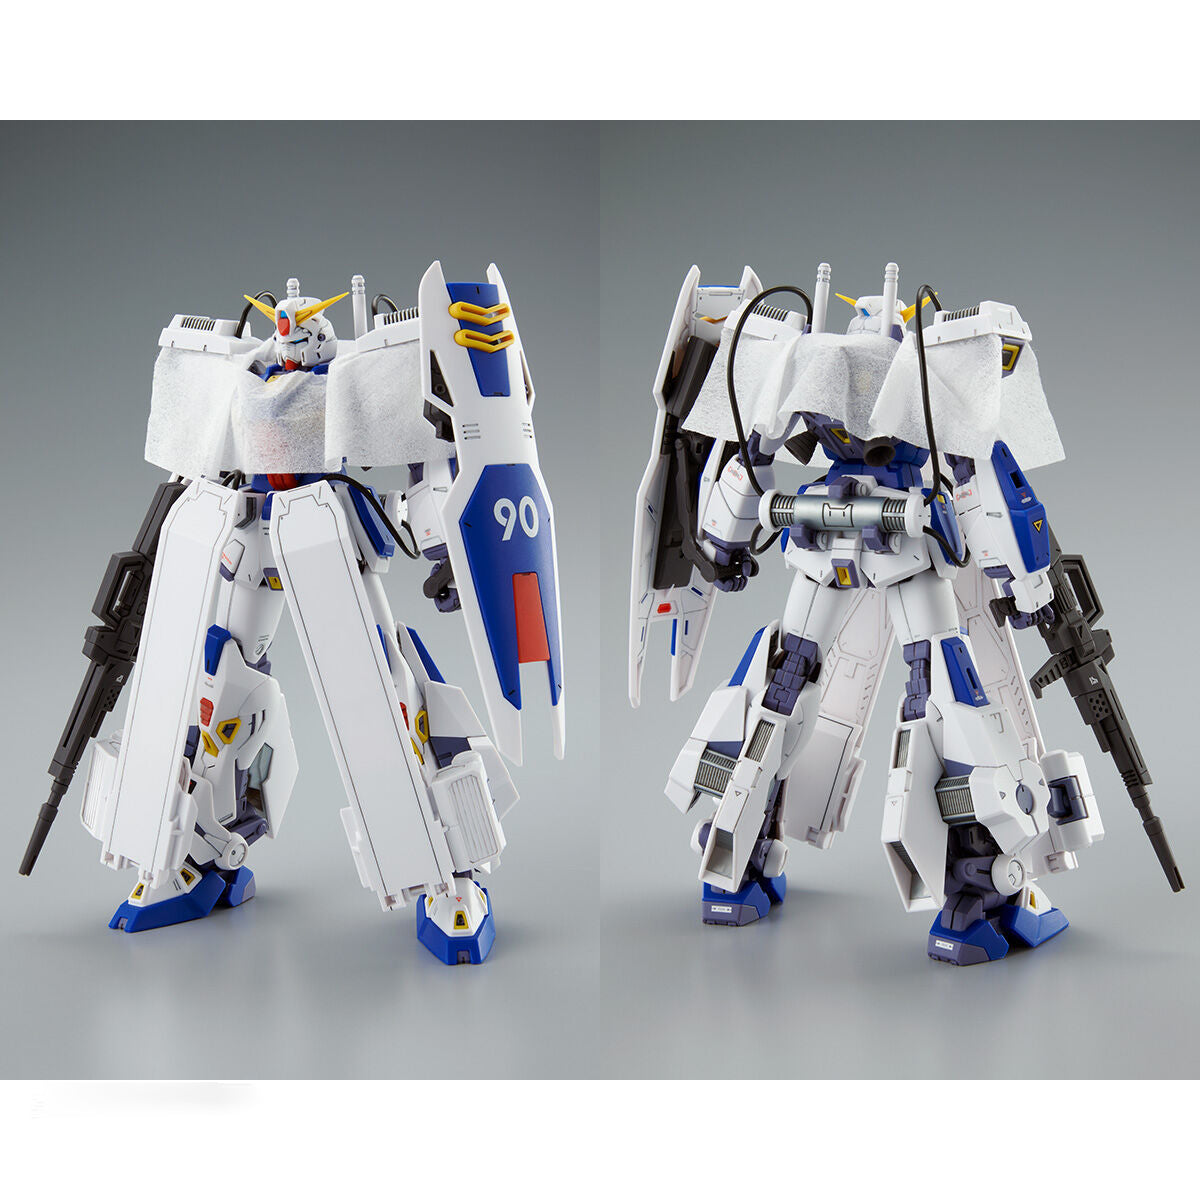 LIMITED Premium Bandai MG 1/100 MISSION PACK C-TYPE & T-TYPE for GUNDAM F90